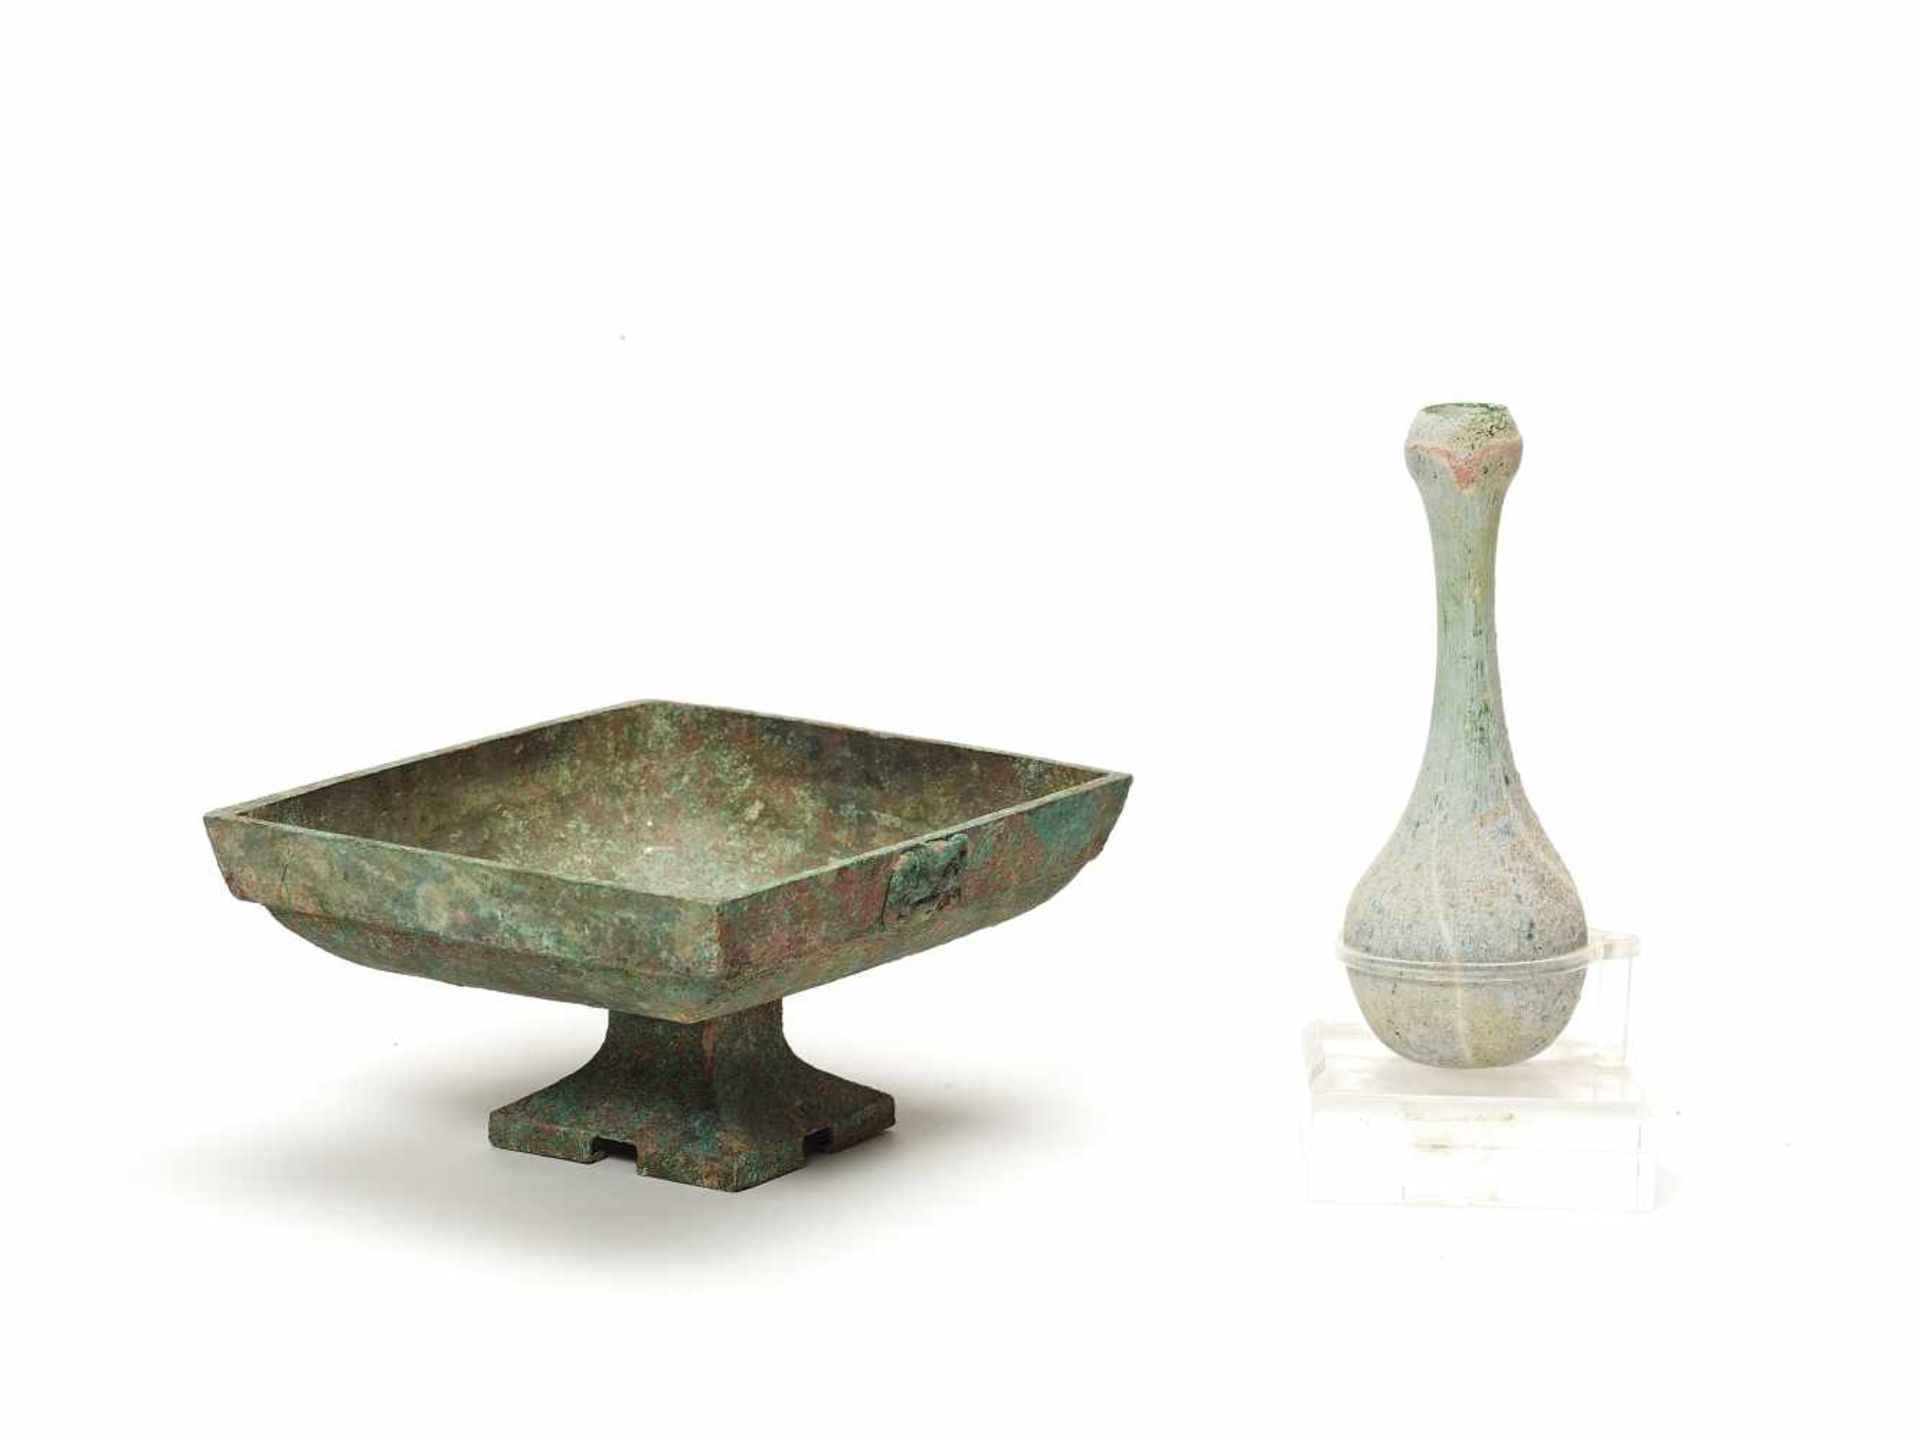 TWO CHINESE BRONZE VESSELS, HAN DYNASTYBronzeHan dynasty (206 BC-220 AD)This group of two Chinese